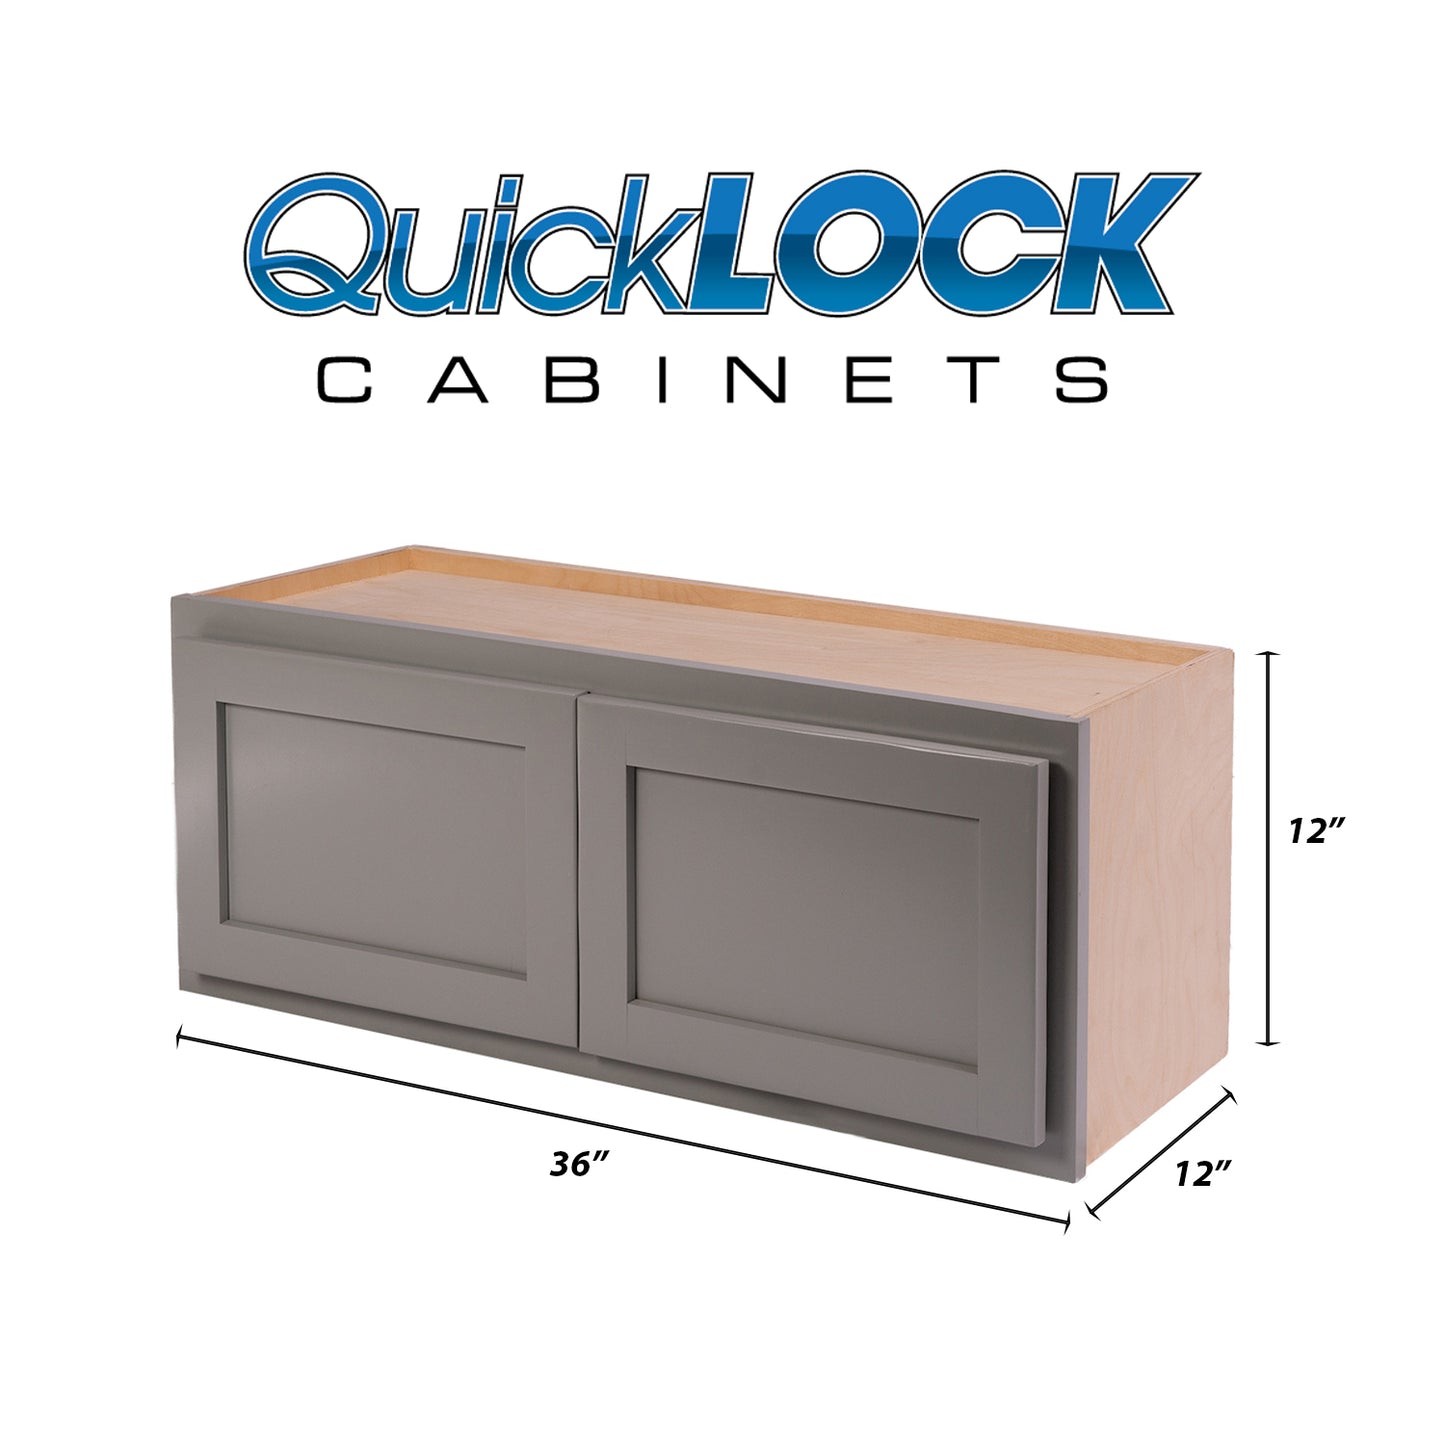 Quicklock RTA (Ready-to-Assemble) Magnetic Grey 36"Wx12"Hx12"D Wall Refrigerator